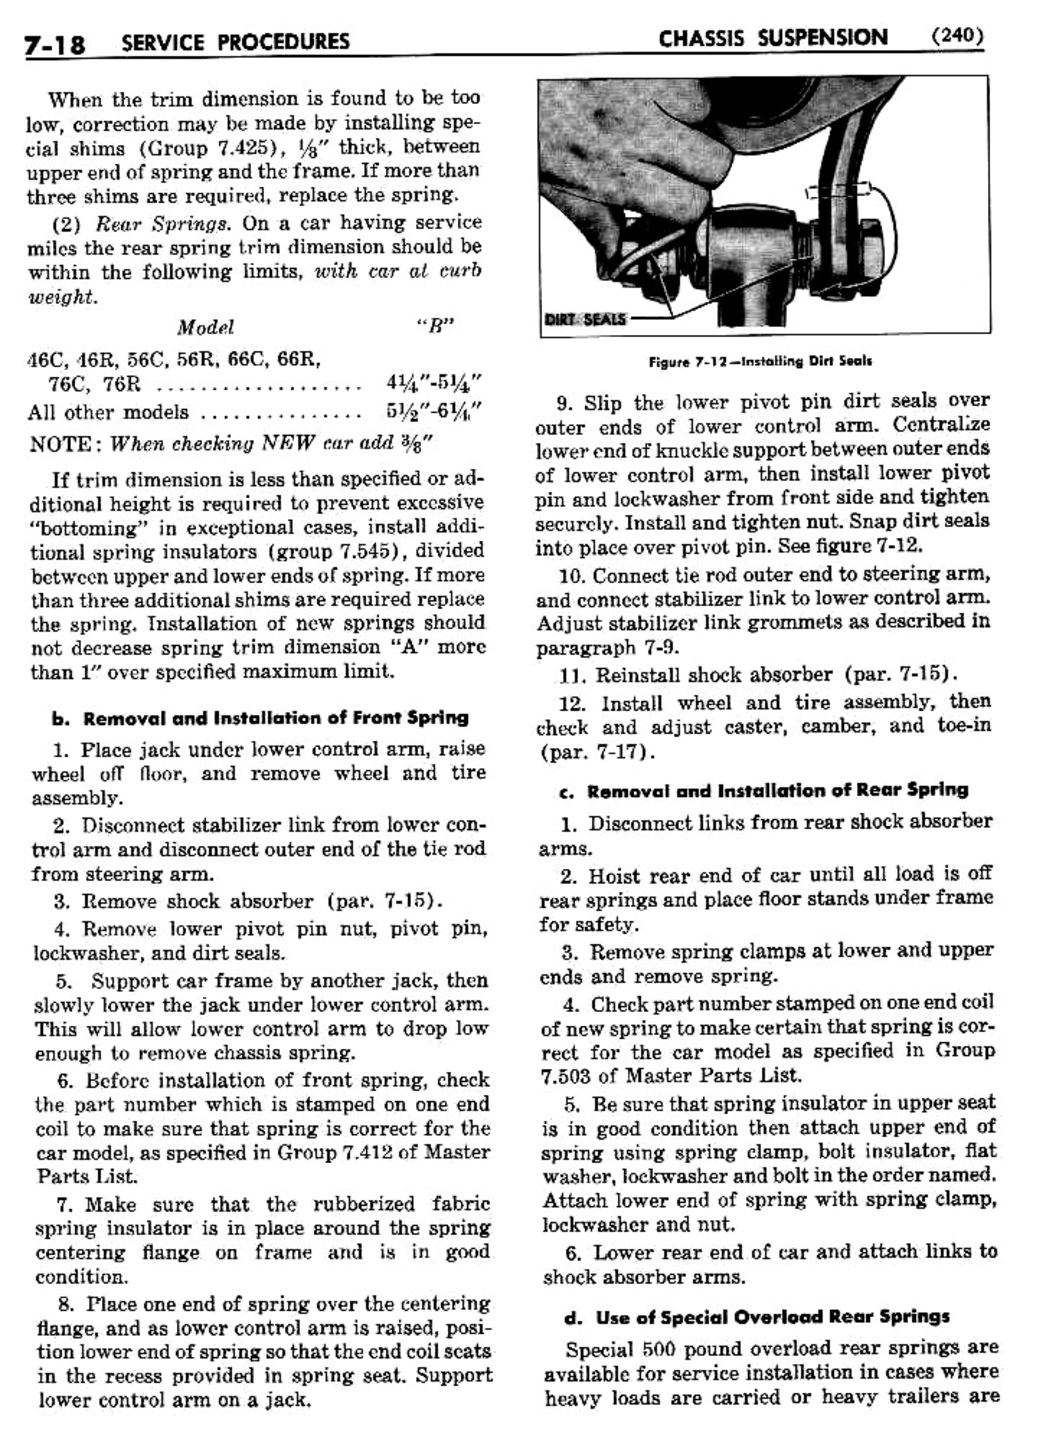 n_08 1955 Buick Shop Manual - Chassis Suspension-018-018.jpg